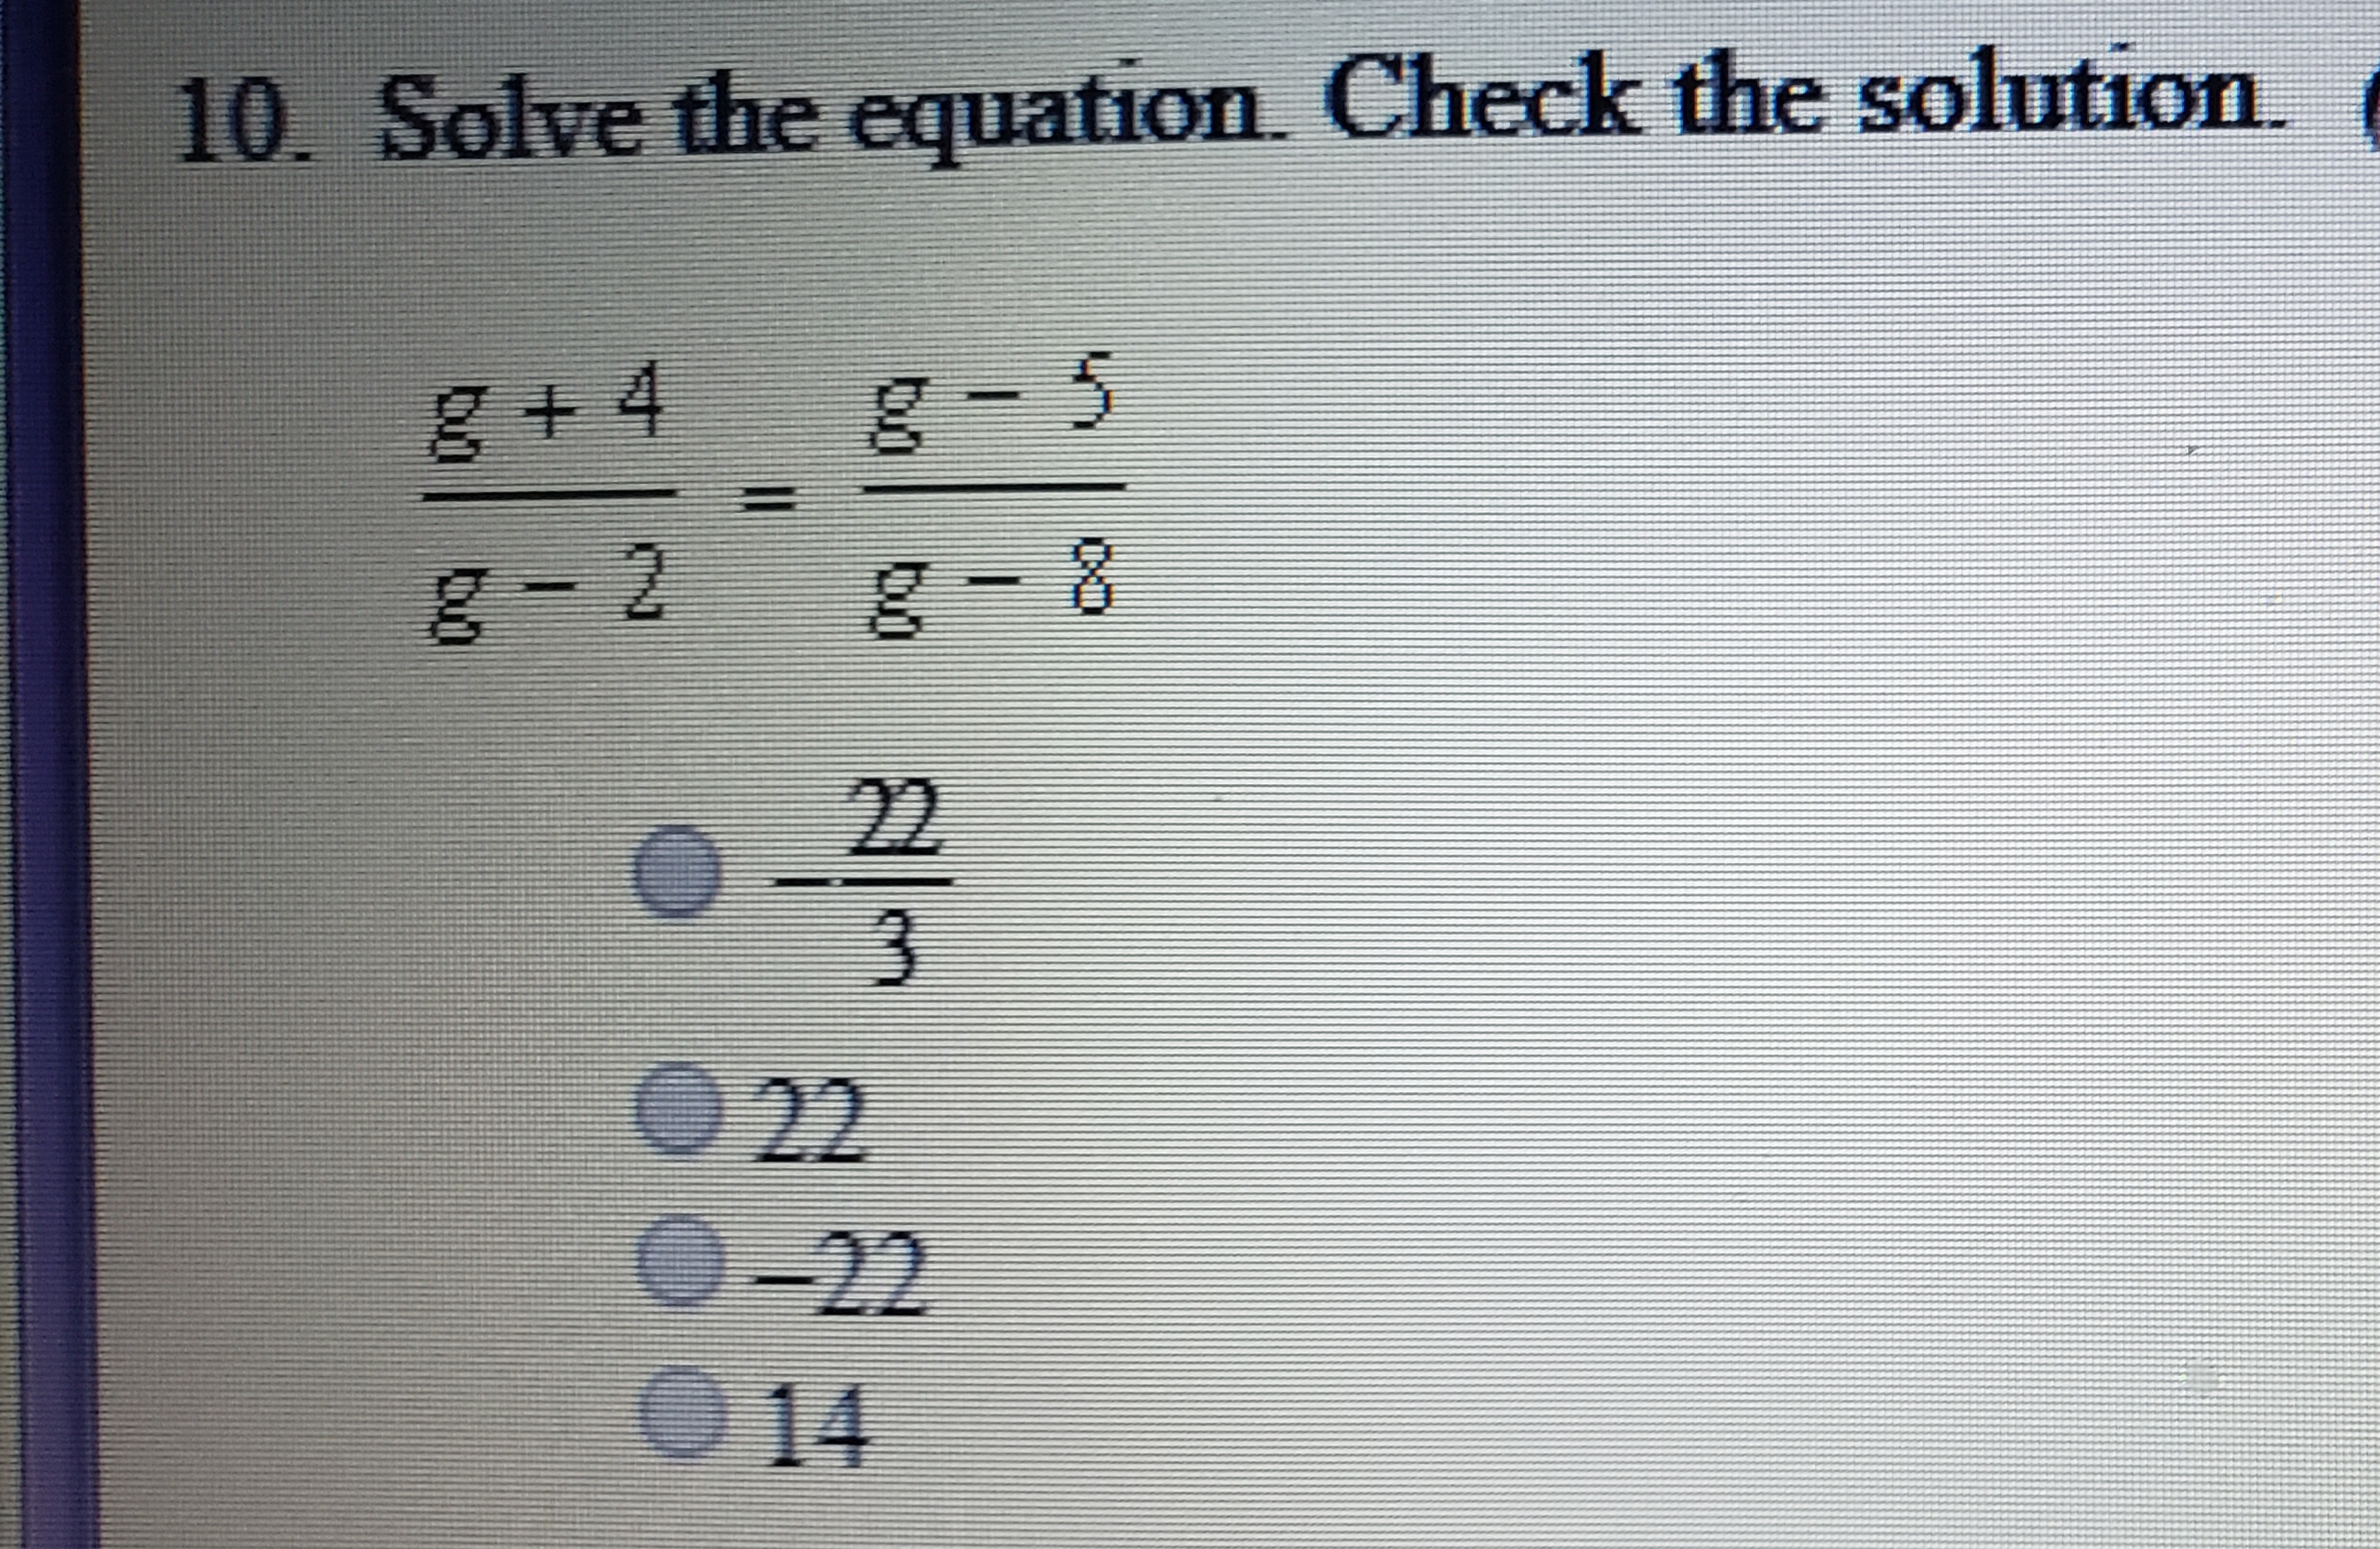 10. Solve the equation. Check the solution.
8-2
g-8
